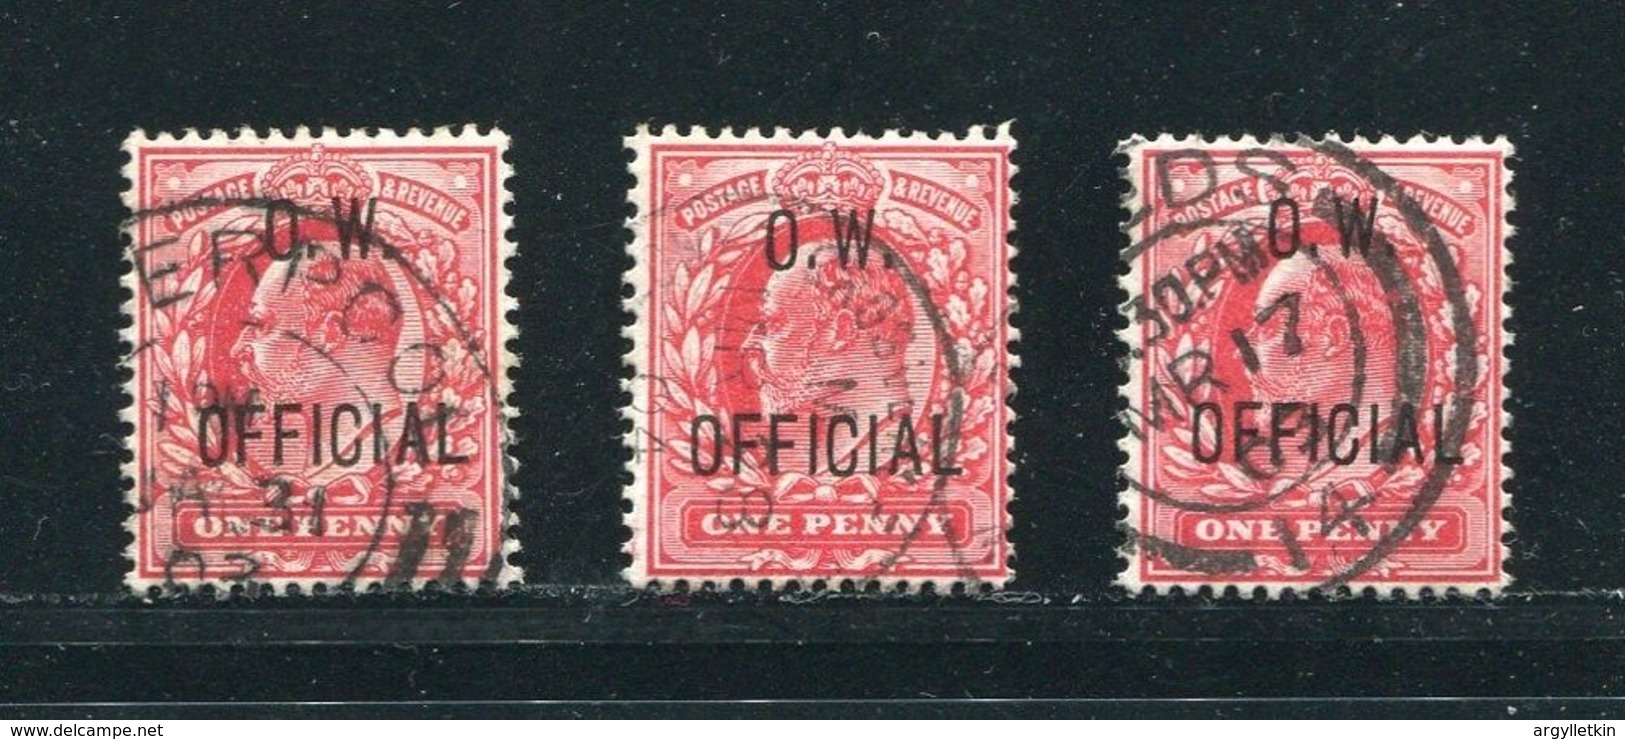 GB KING EDWARD 7TH OFFICIAL STAMPS O.W. OFFICIAL LEEDS LIVERPOOL - Zonder Classificatie